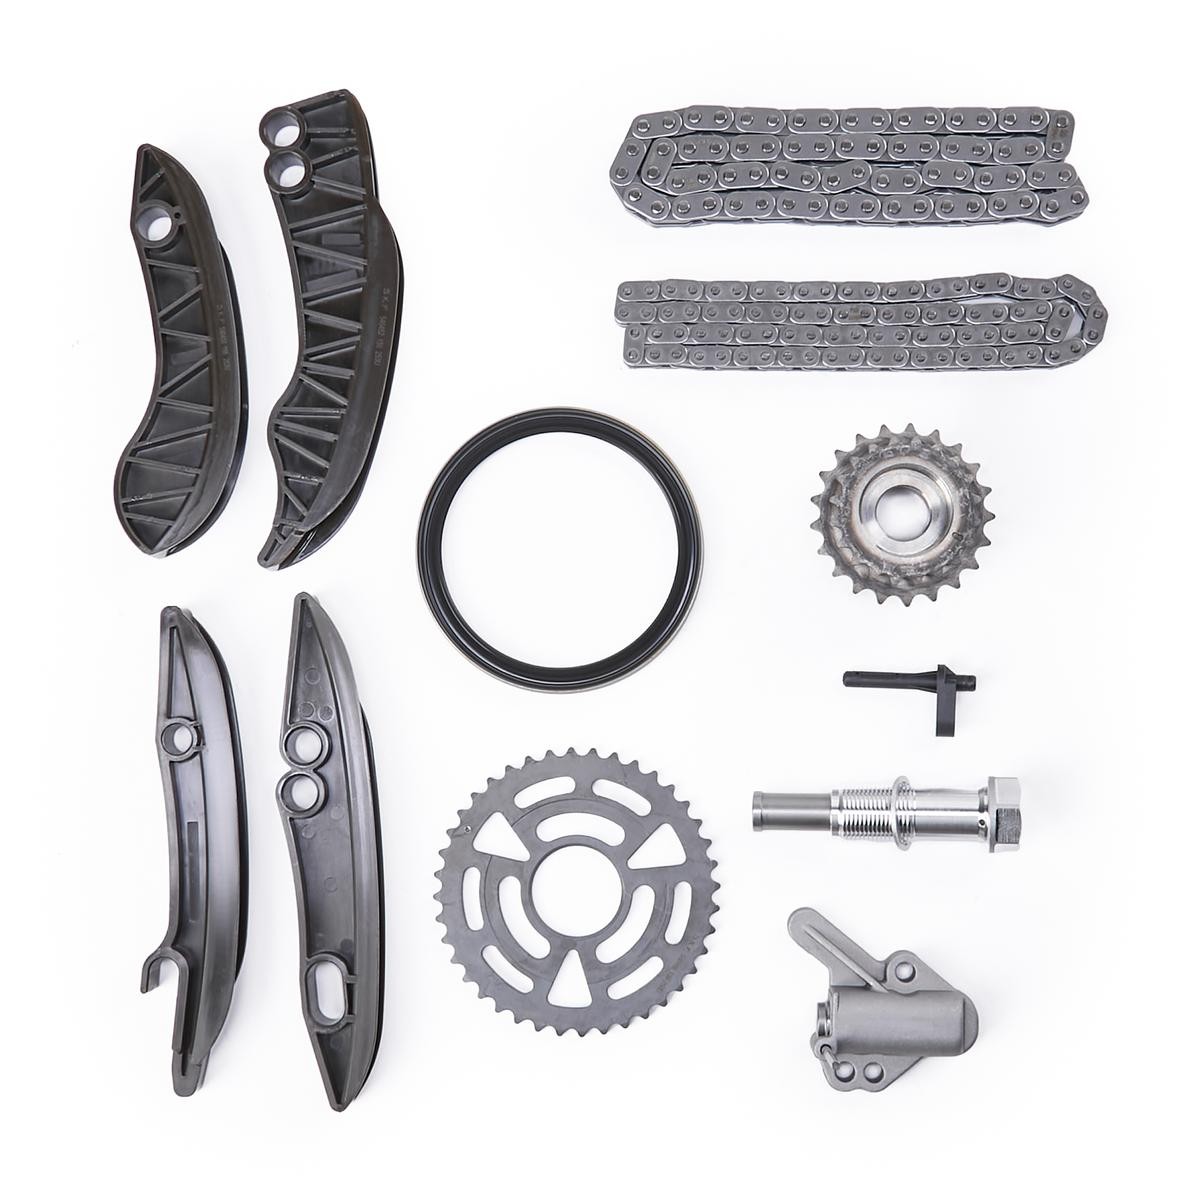 Original VKML 88005 SKF Timing chain kit experience and price